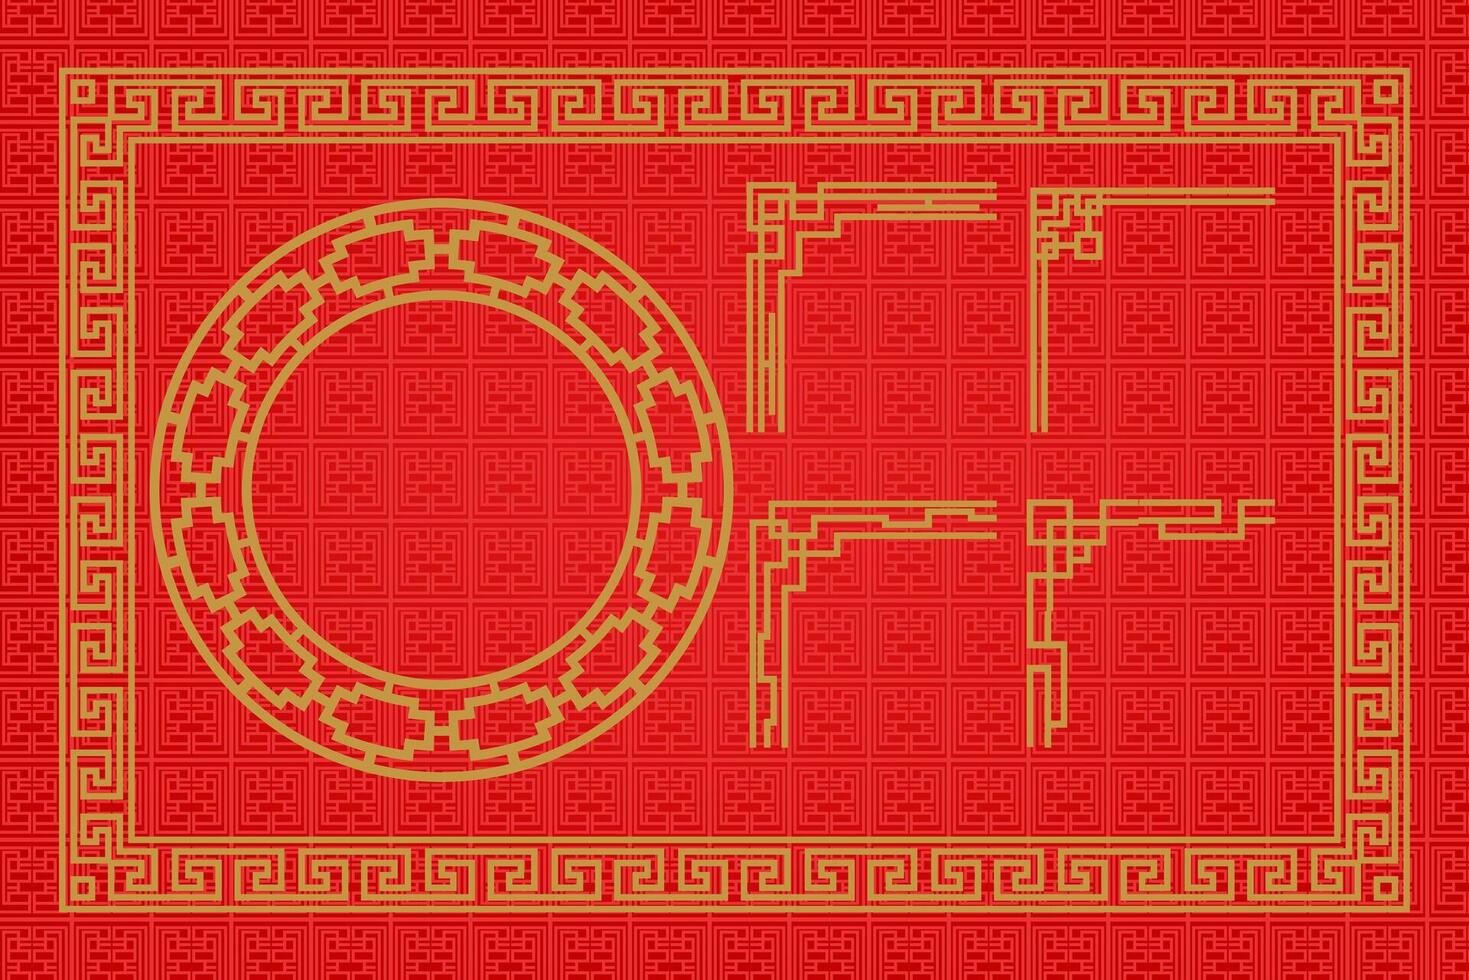 Chinese oosters grens ornament vector